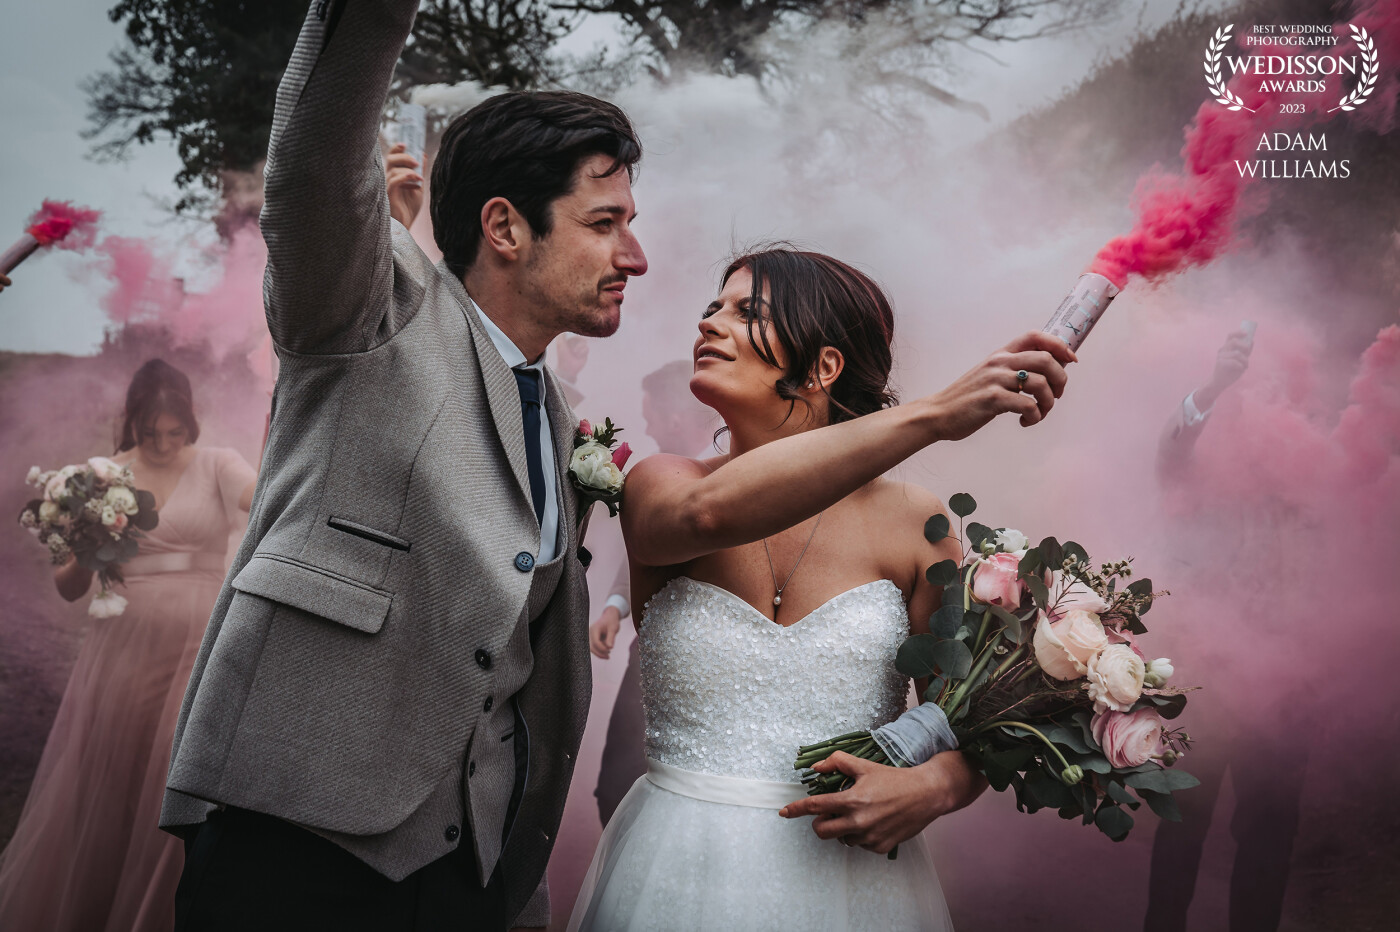 We absolutely love this photograph, Kellie’s heart looks so full as she’s looking up at her Husband Frazer, we had so much fun with them both and their bridal party, these smoke bombs were brilliant!